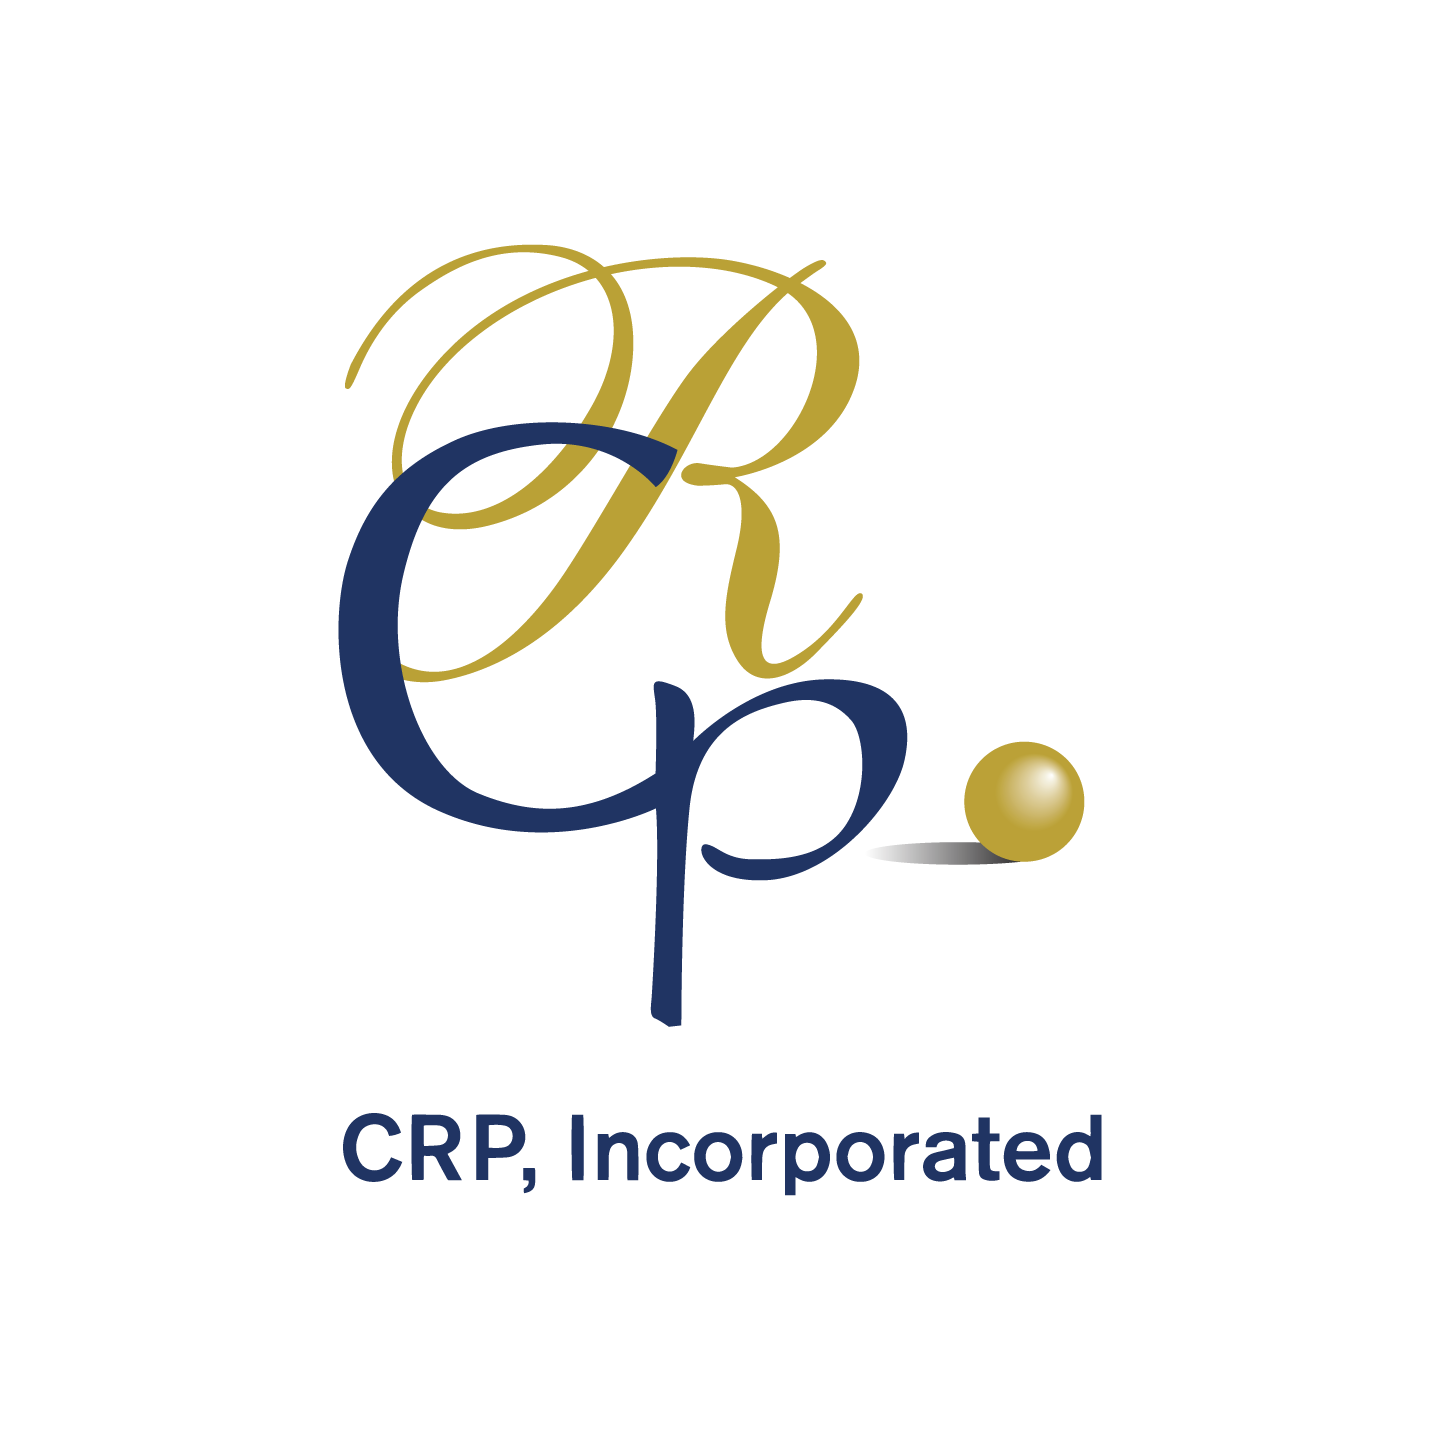 CRP, Incorporated